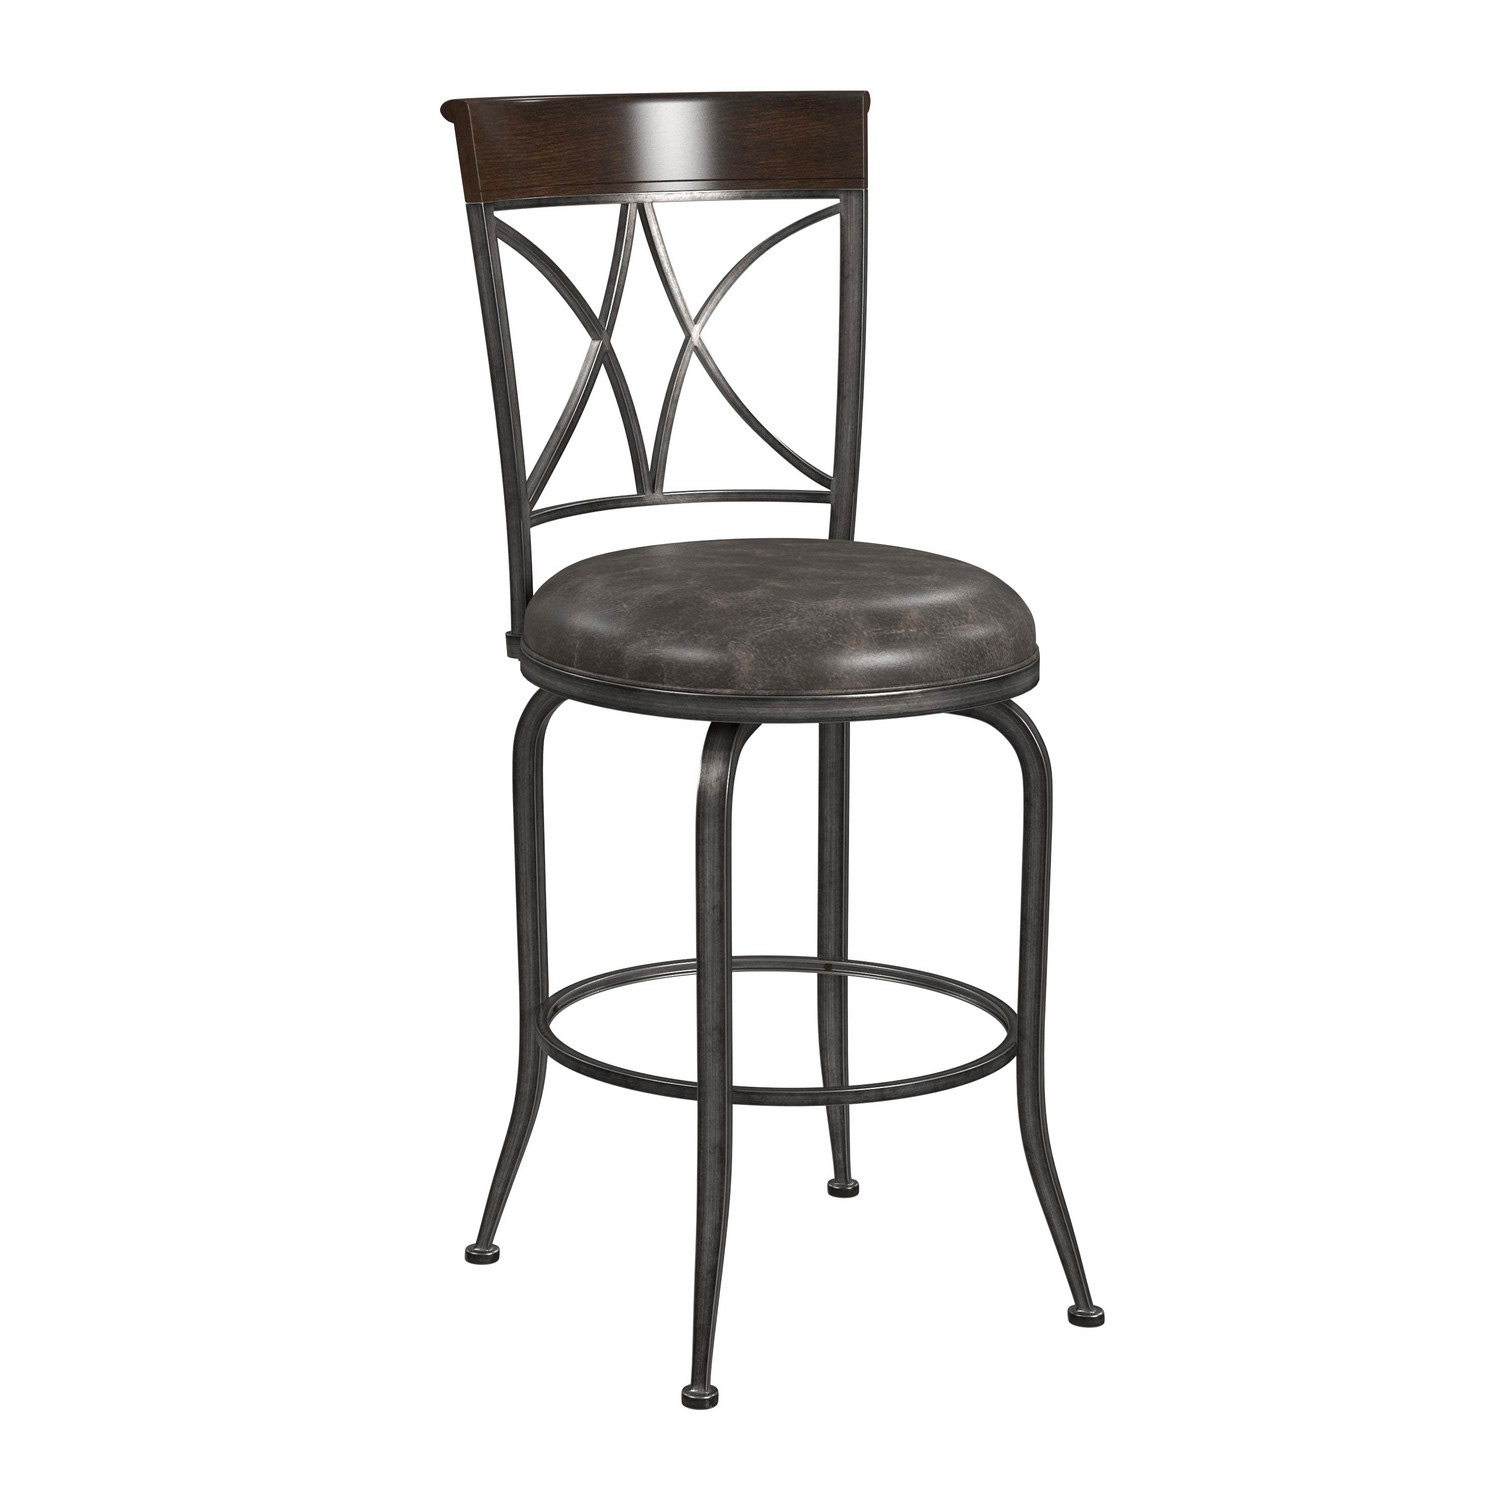 Hillsdale Killona Metal Counter Height Swivel Stool - Antique Pewter